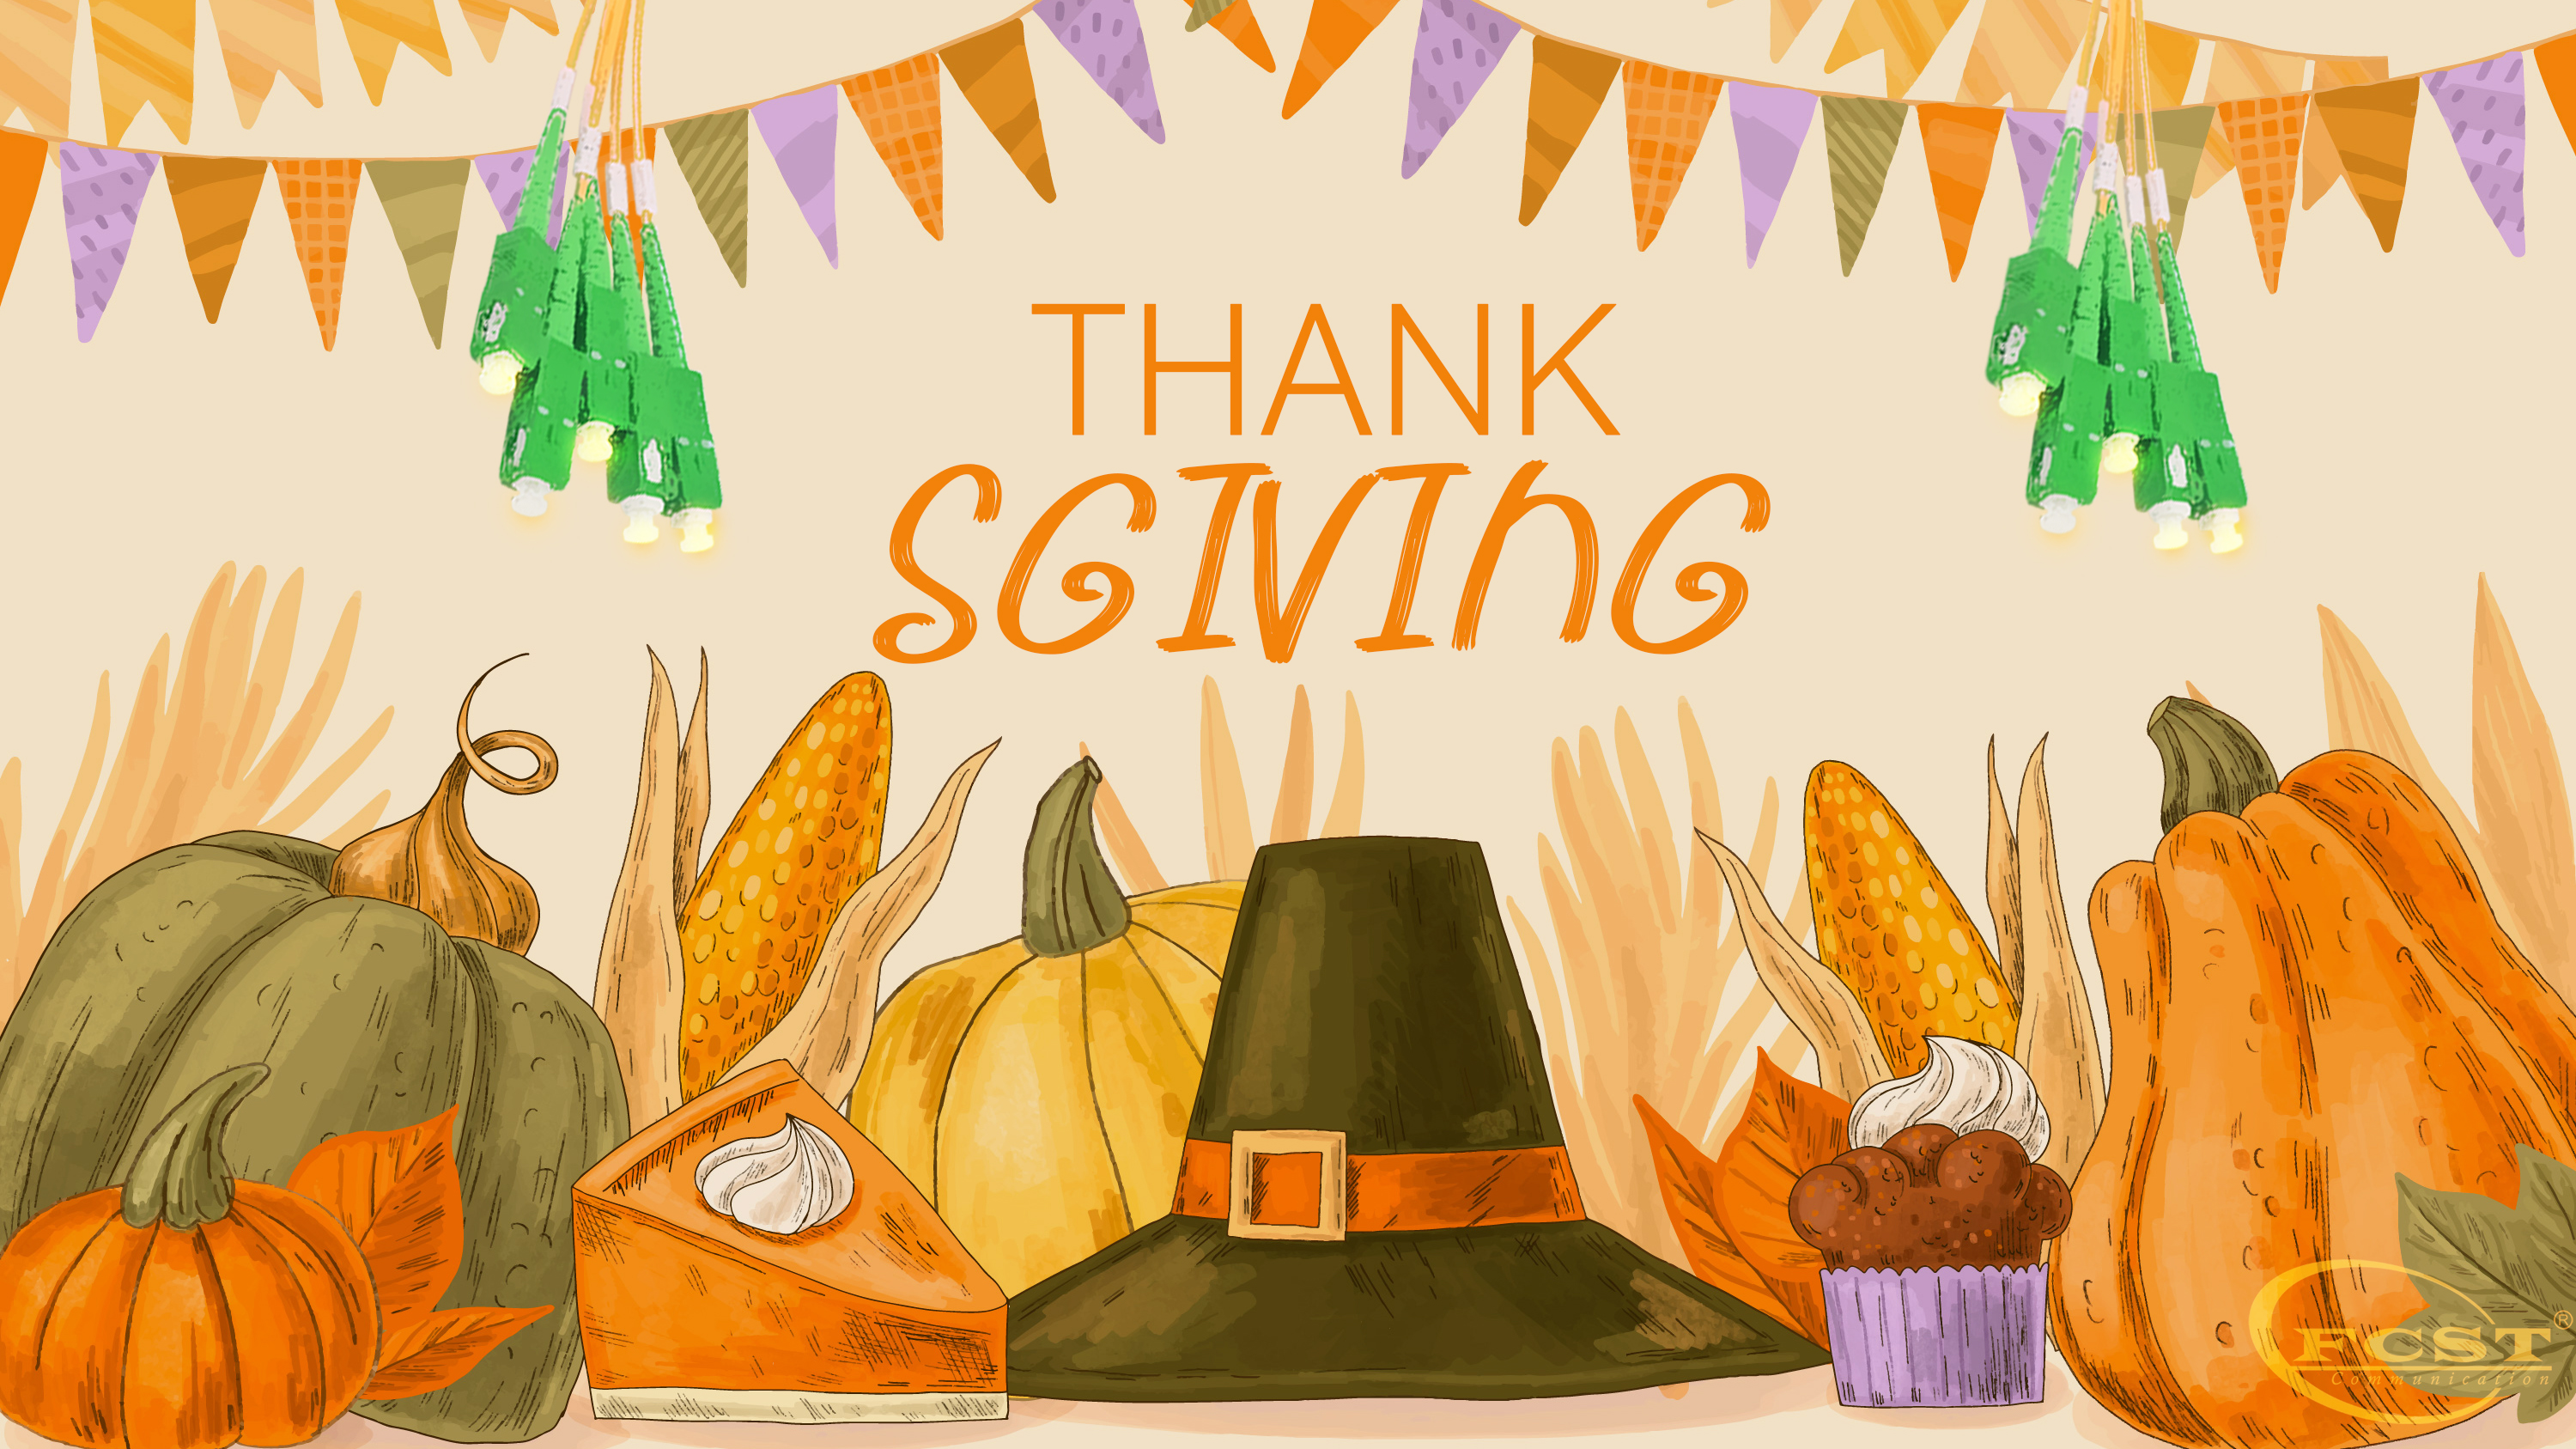 FCST wish you a happy Thanksgiving Day!